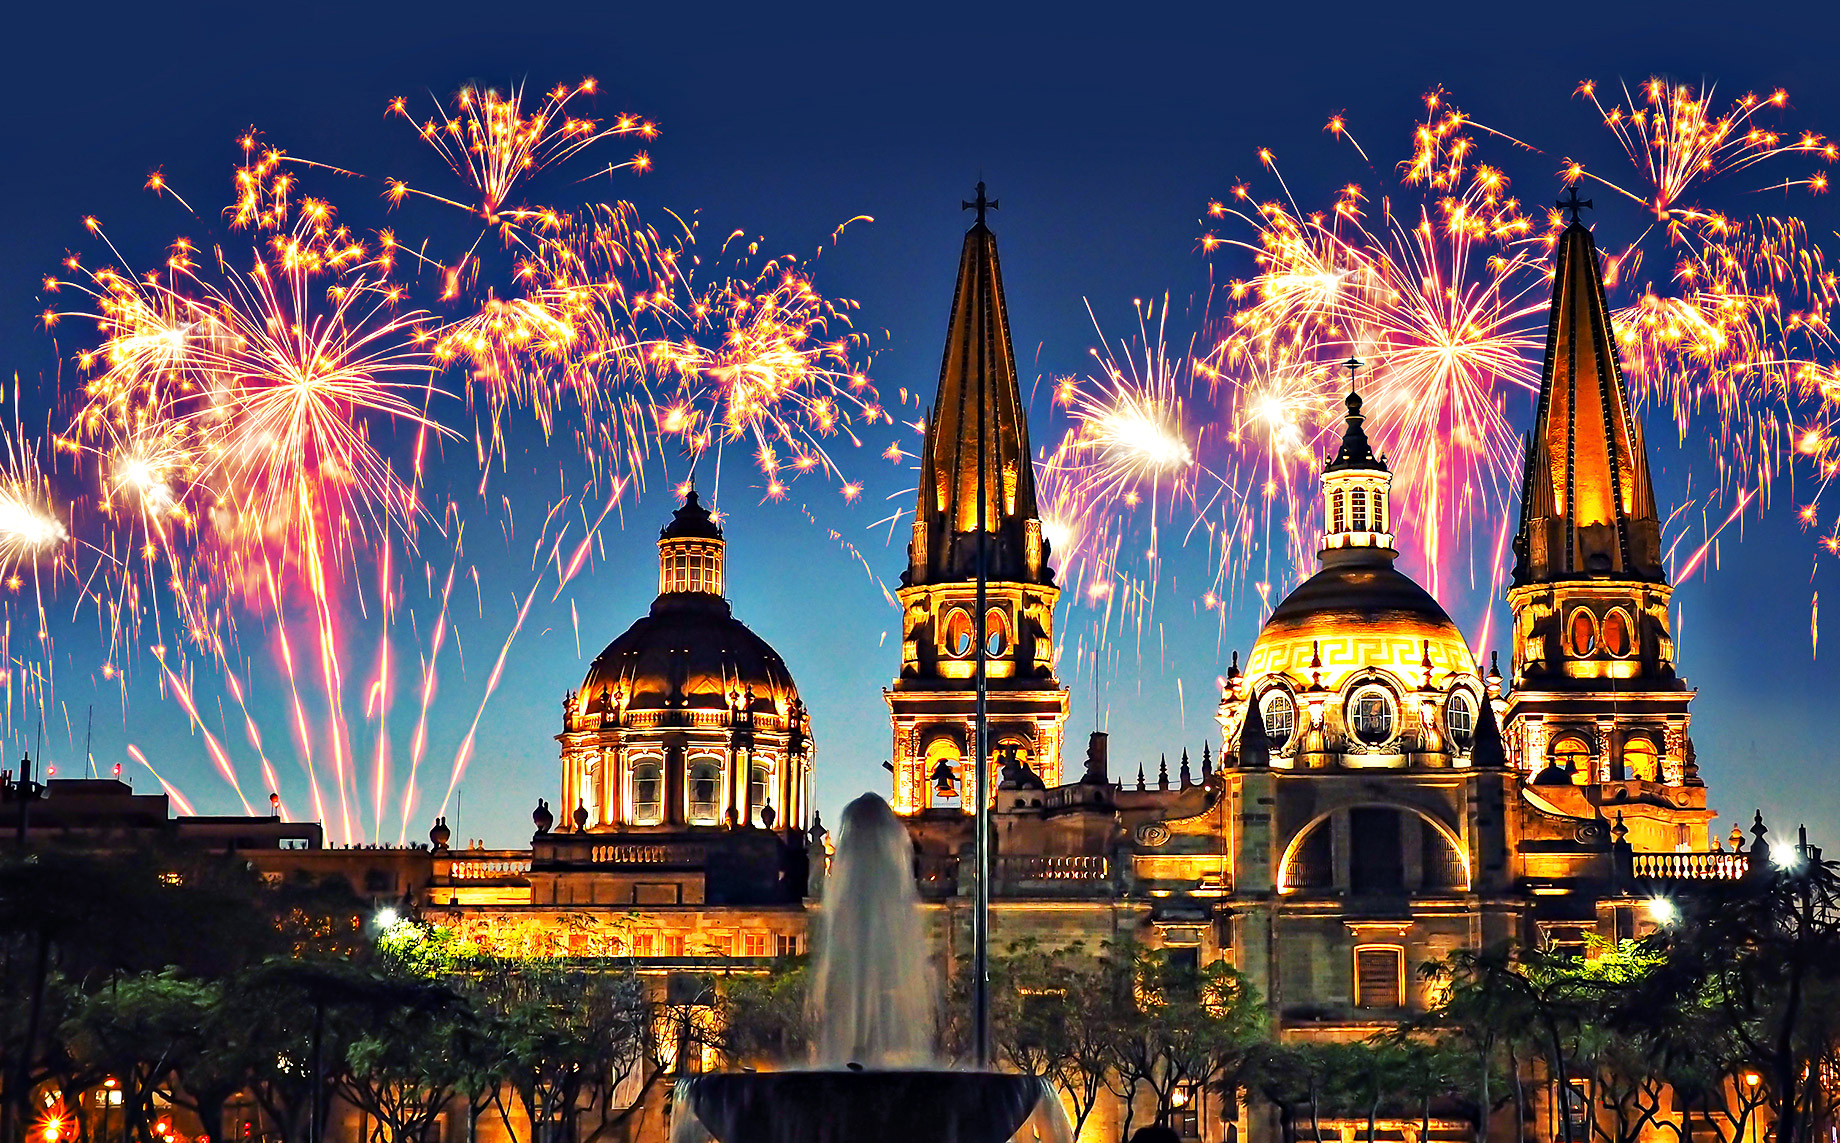 Fireworks at the Cathedral of the Assumption of Our Lady - Guadalajara, Jalisco, Mexico